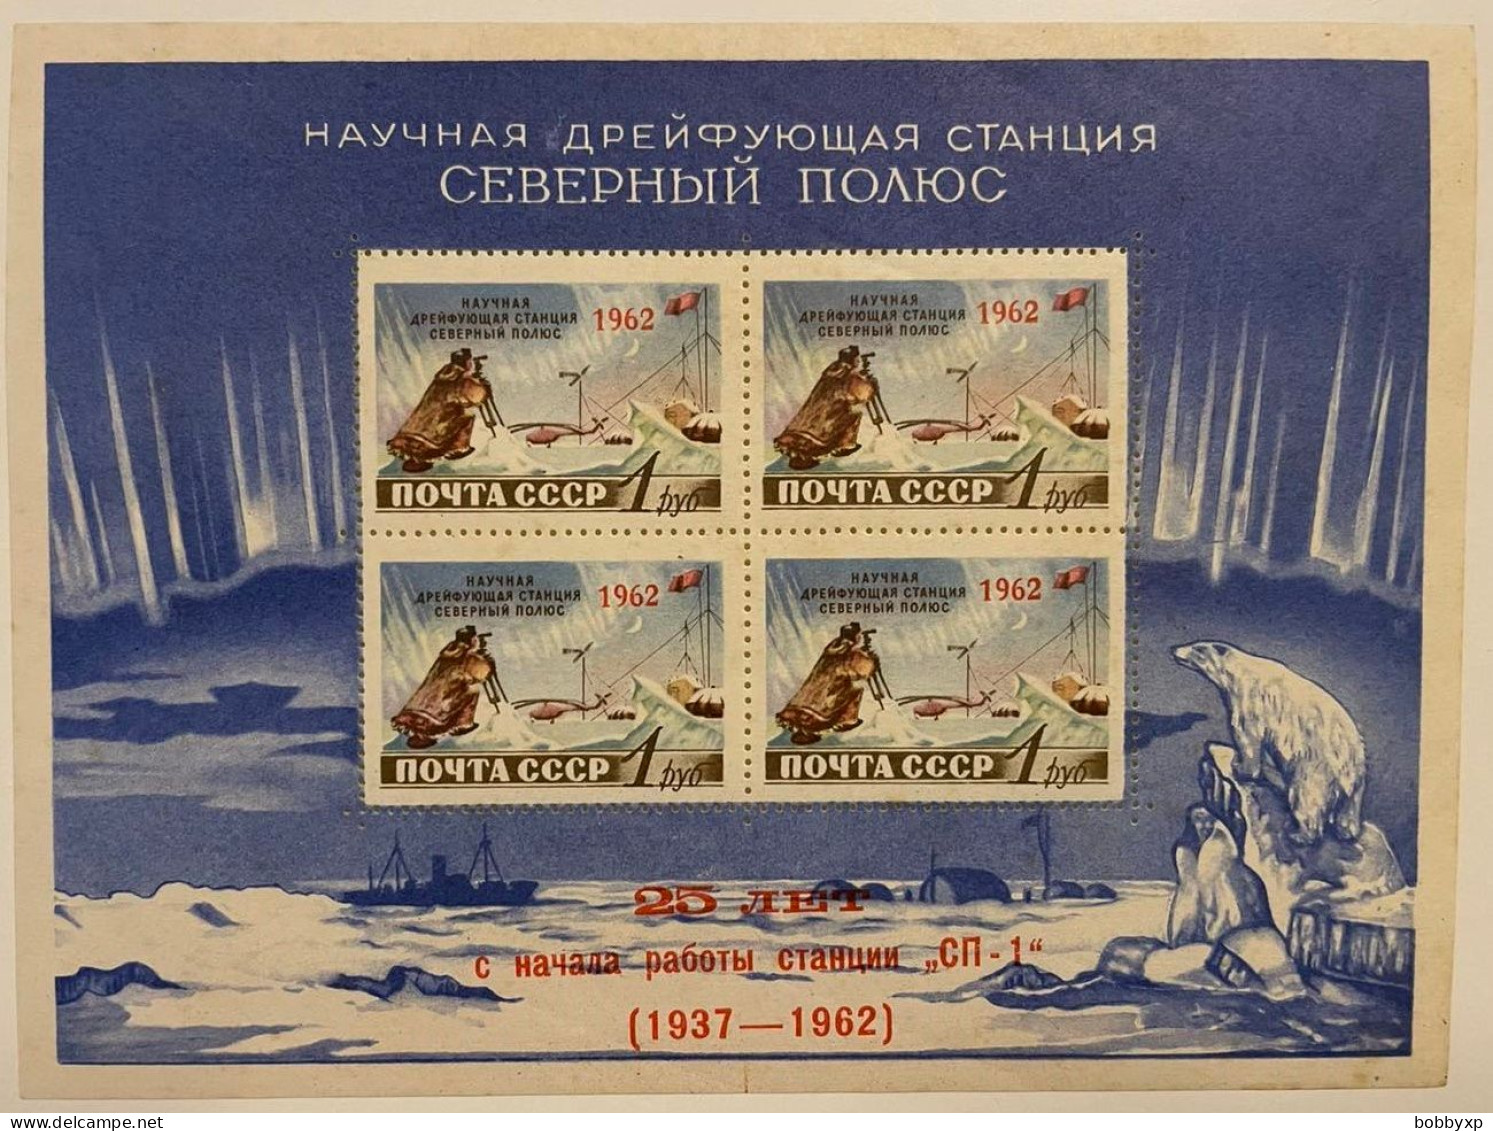 Russia. USSR 1962. Full Yearsets 148 Stamps & 3 Souvenir Sheet. MNH - Full Years